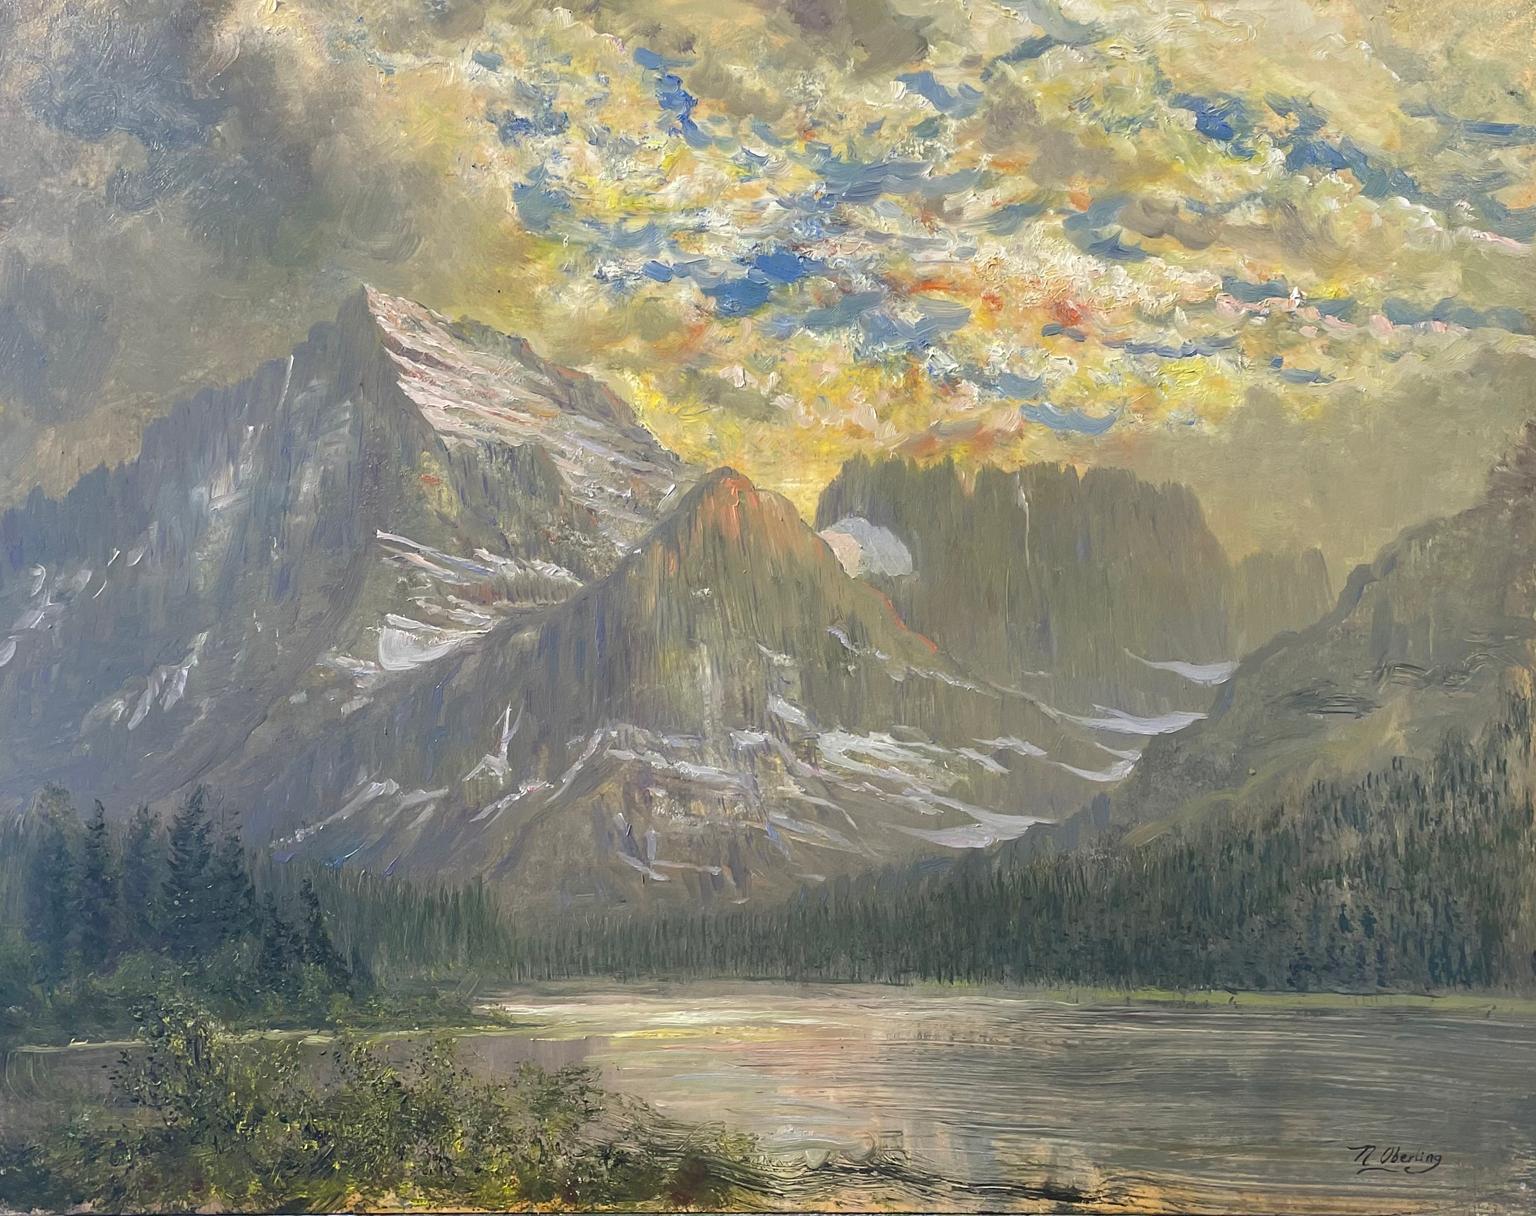 Nicholas Oberling Landscape Painting - Swiftcurrent Lake with Mt. Gould in Sunset, Many Glacier, Glacier National Park,